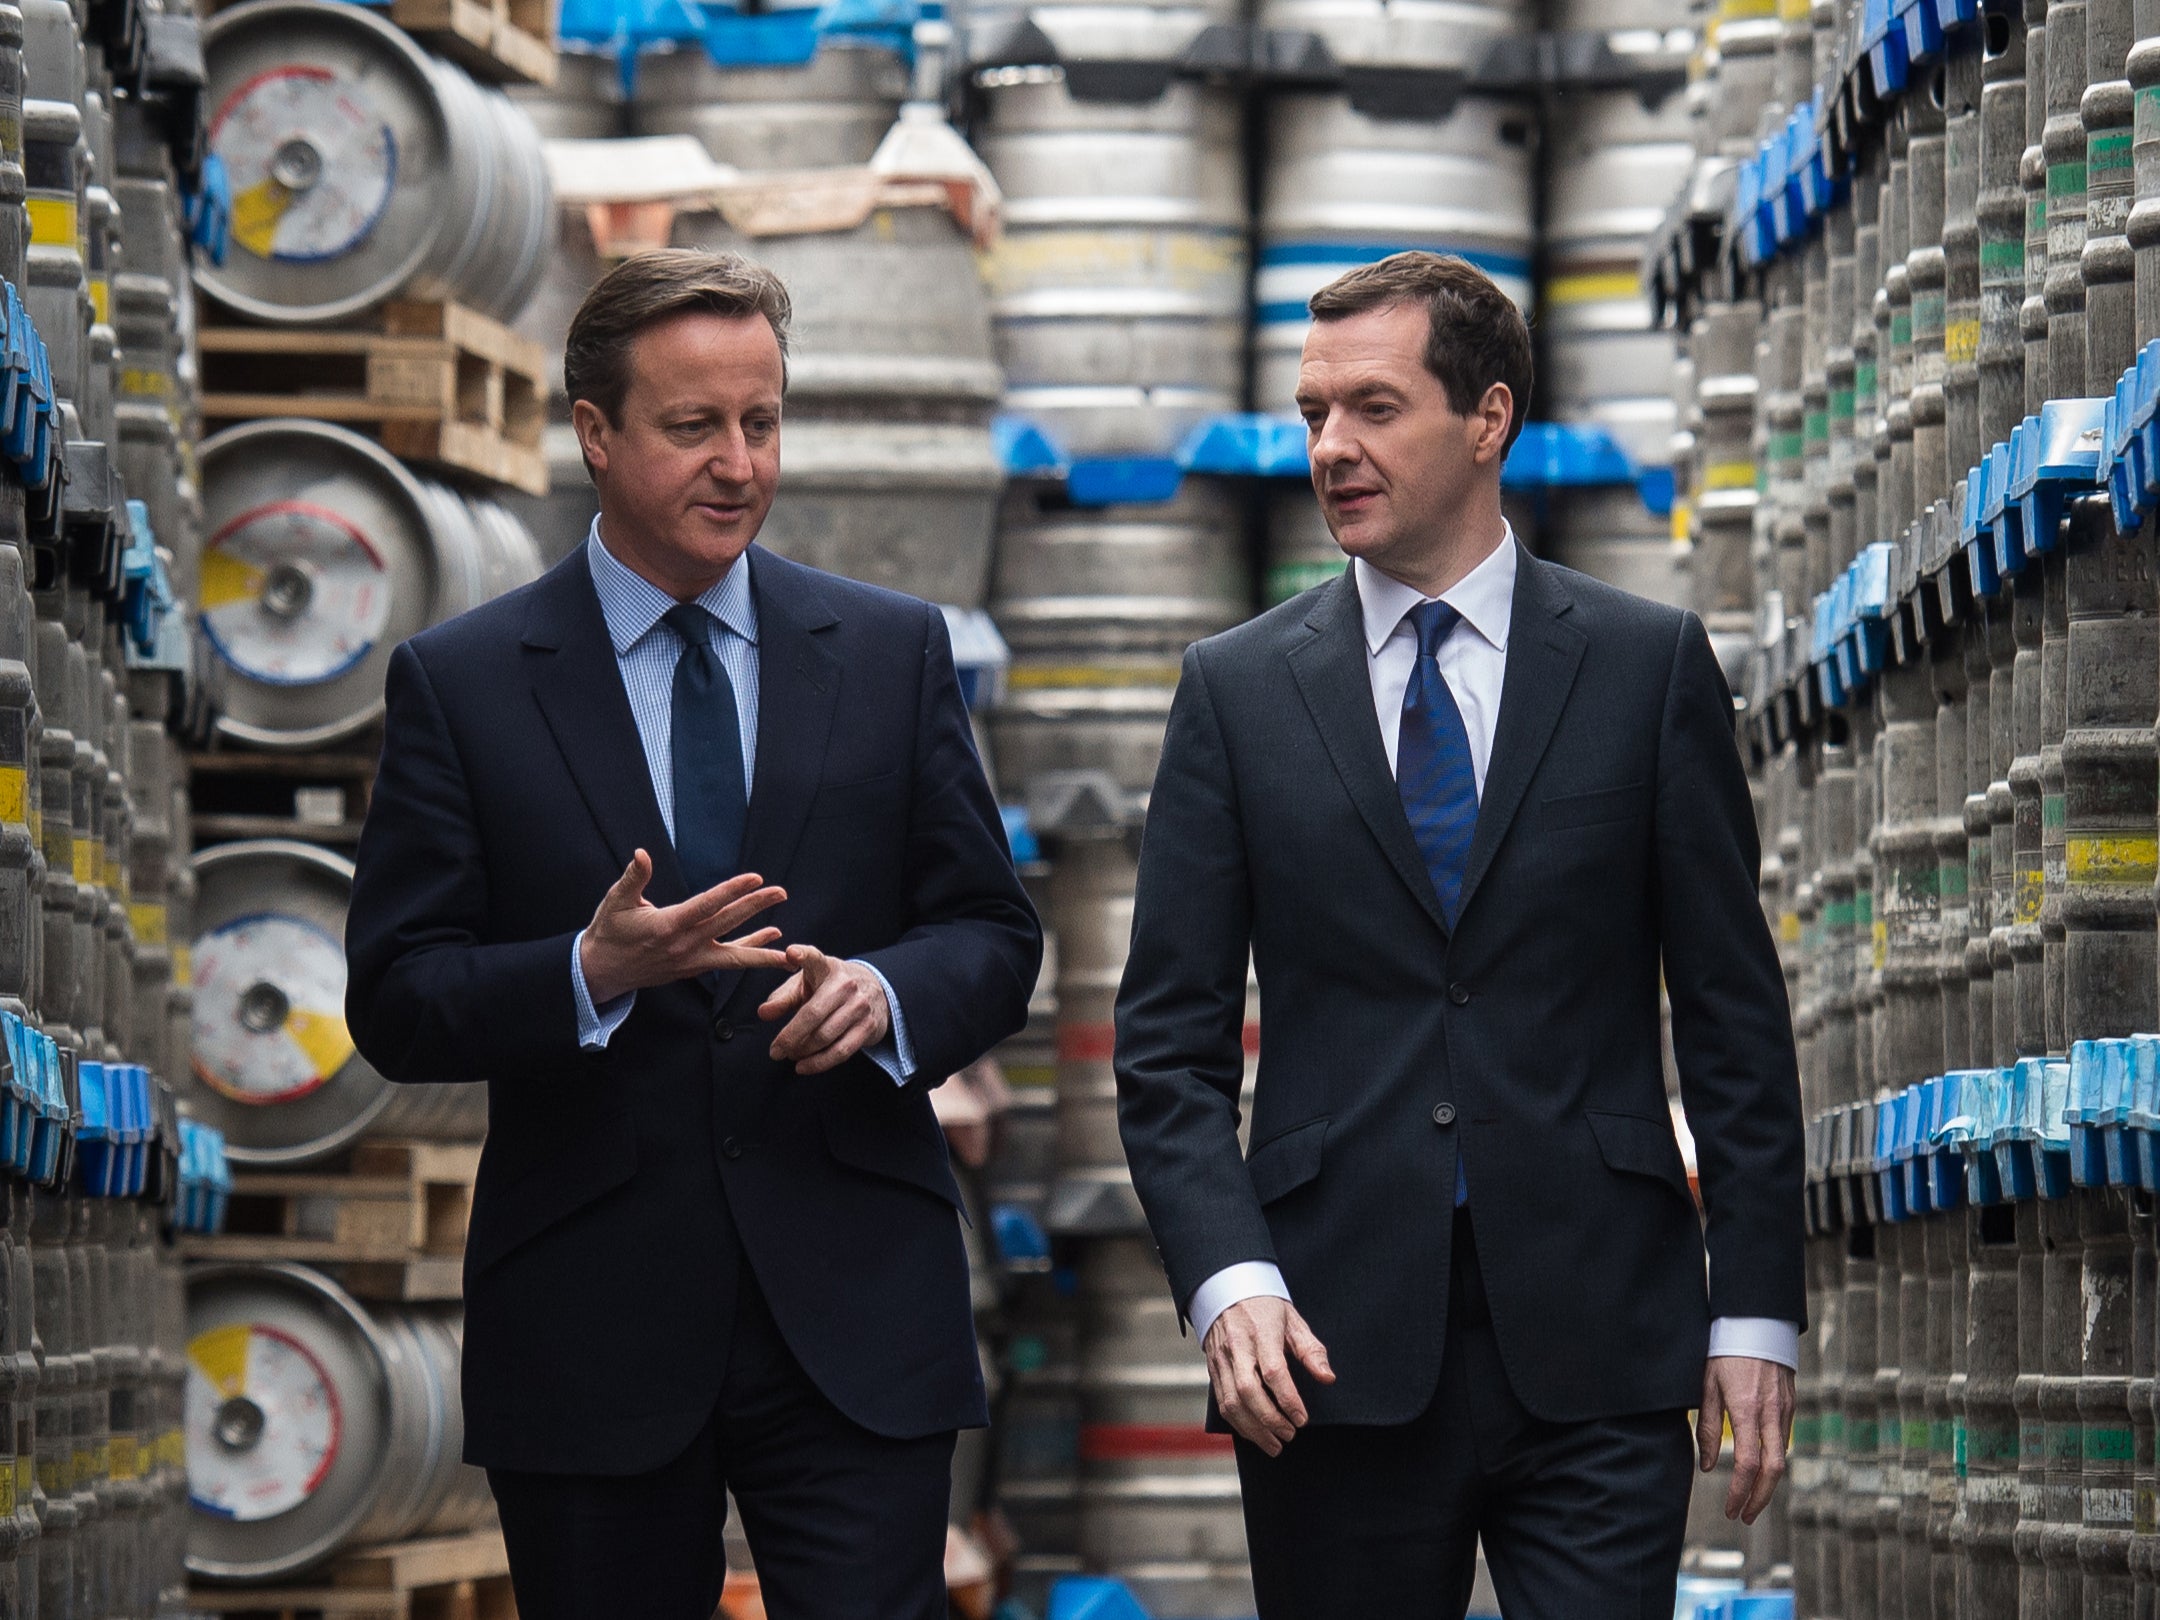 David Cameron and George Osborne have already been cross-examined by the inquiry